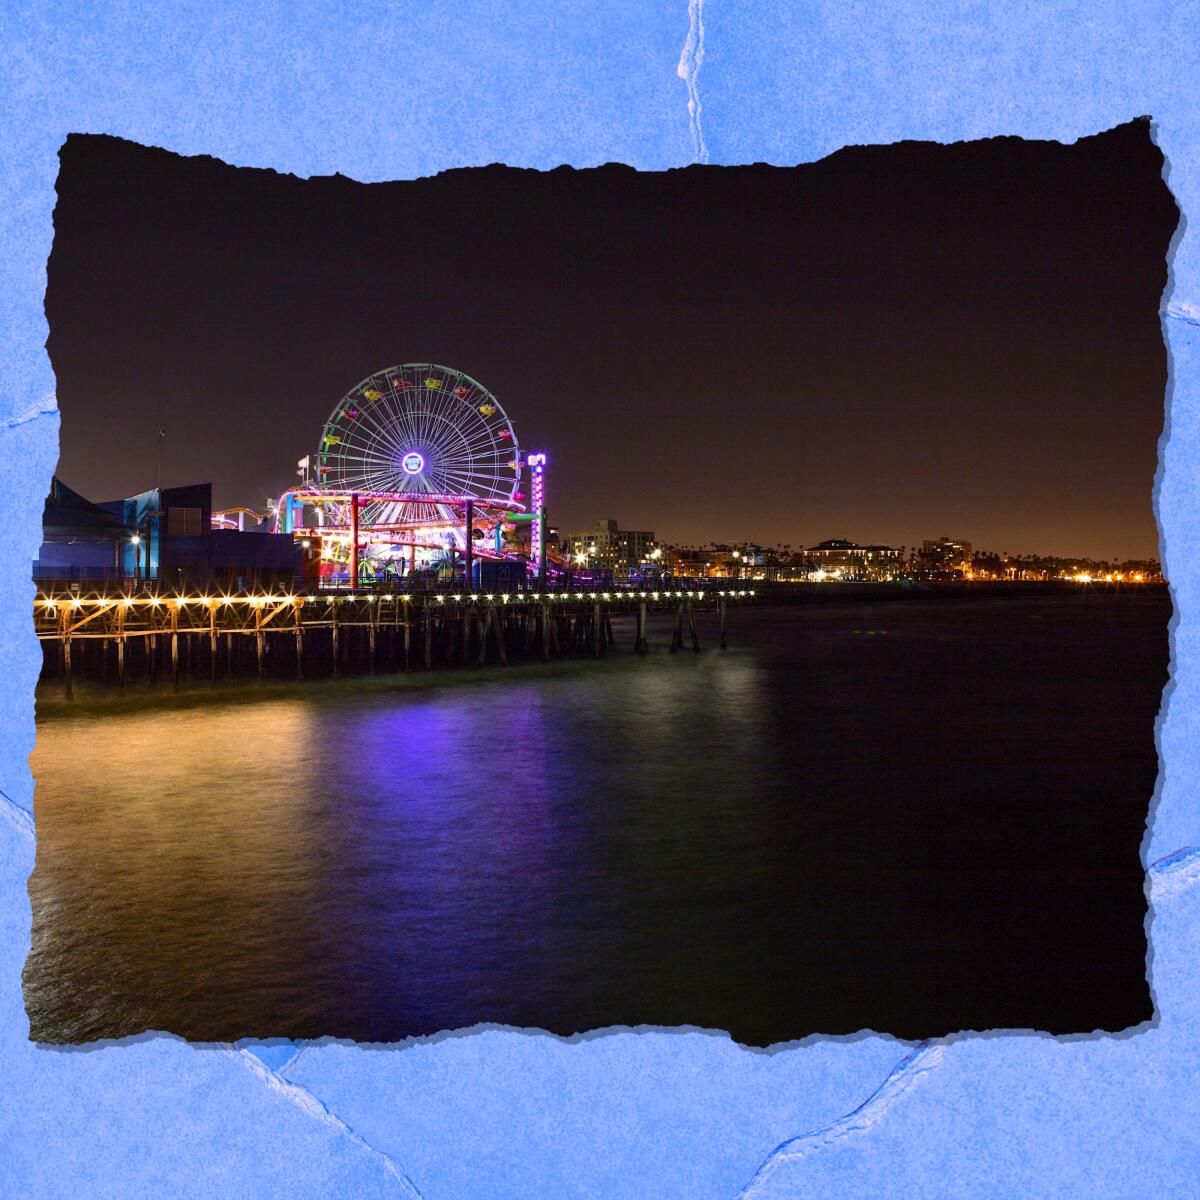 A coastline and lighted pier are shown after dark with a large lighted Ferris wheel.